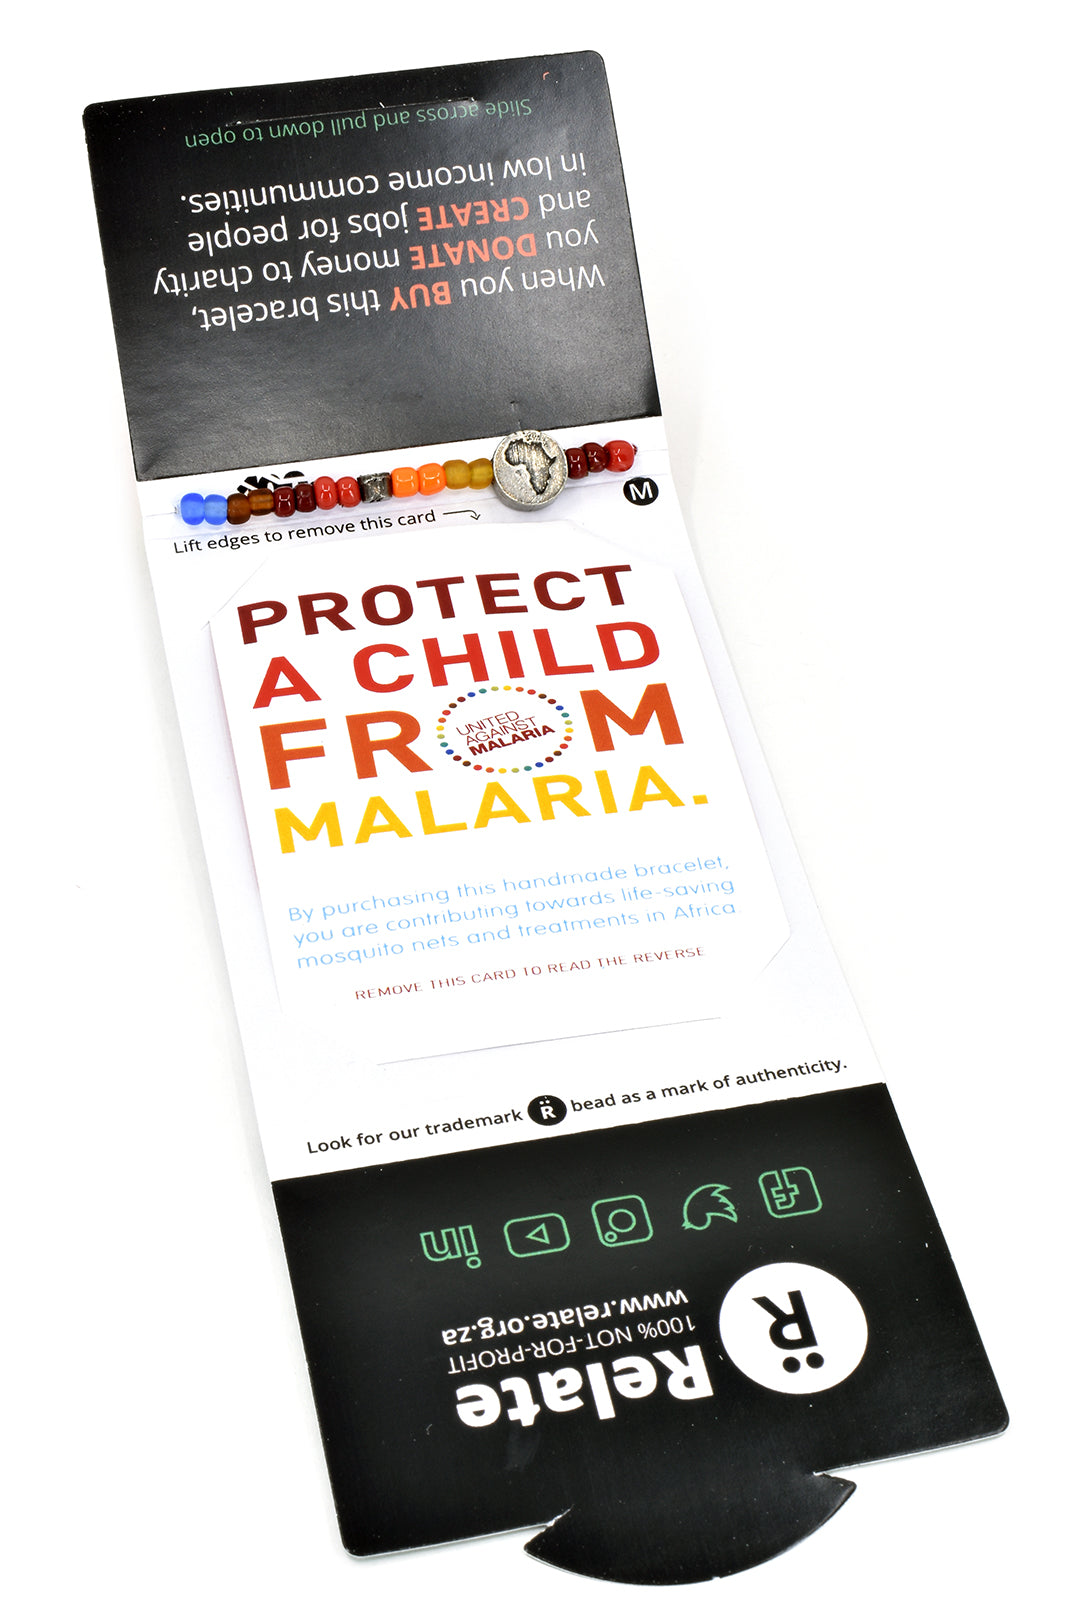 Protect a Child from Malaria South African Relate Cause Bracelet